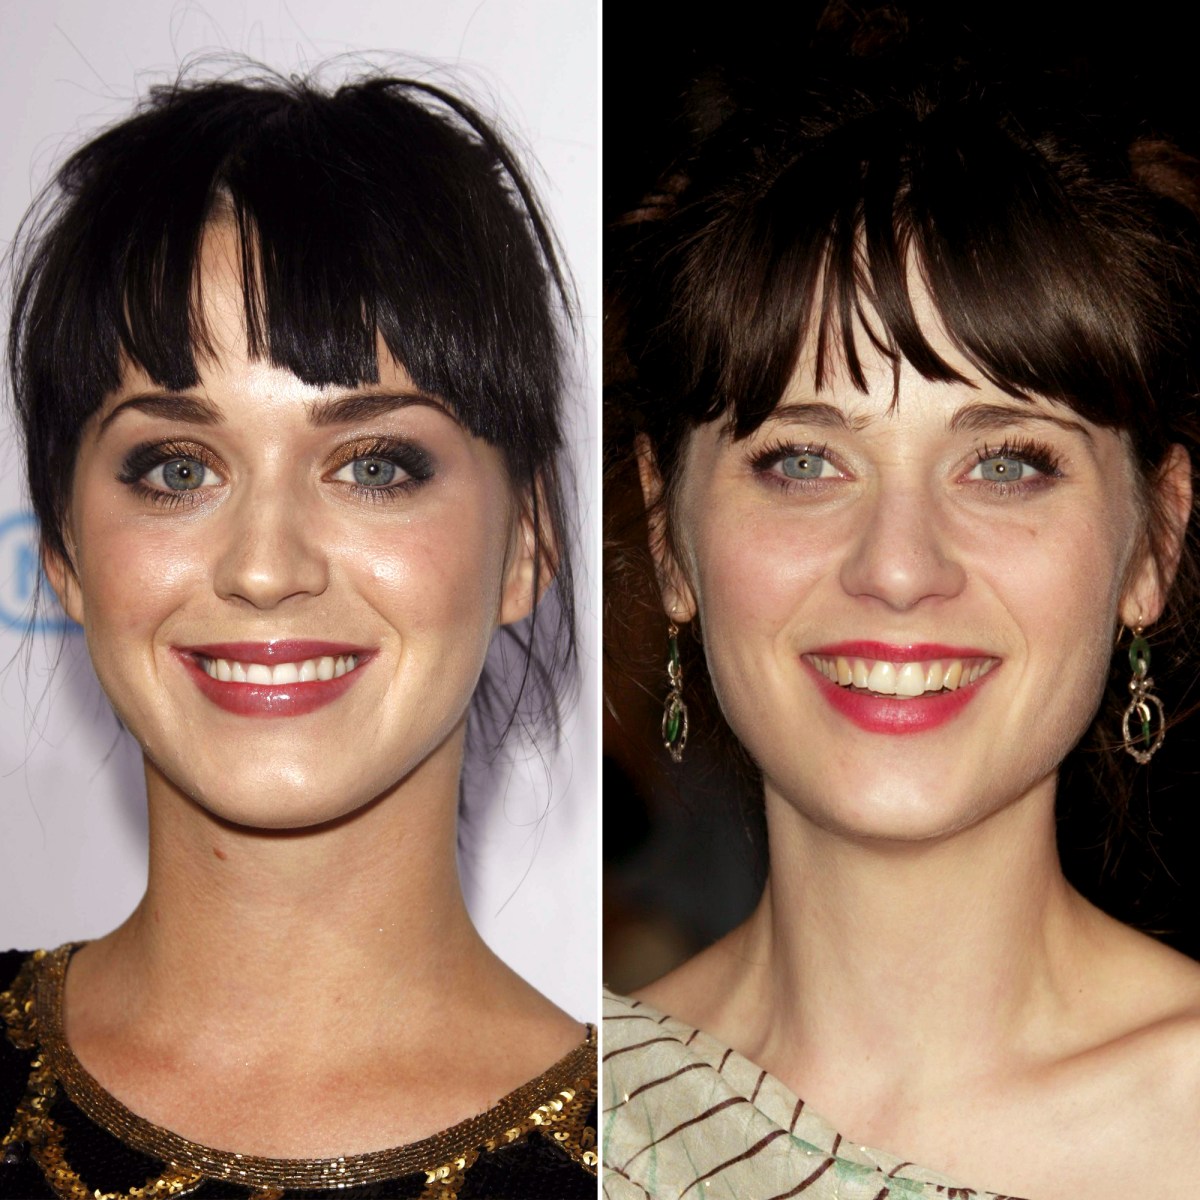 Katy Perry Celeb Porn - Celebrity Doppelgangers: See Photos of Stars Who Look Alike